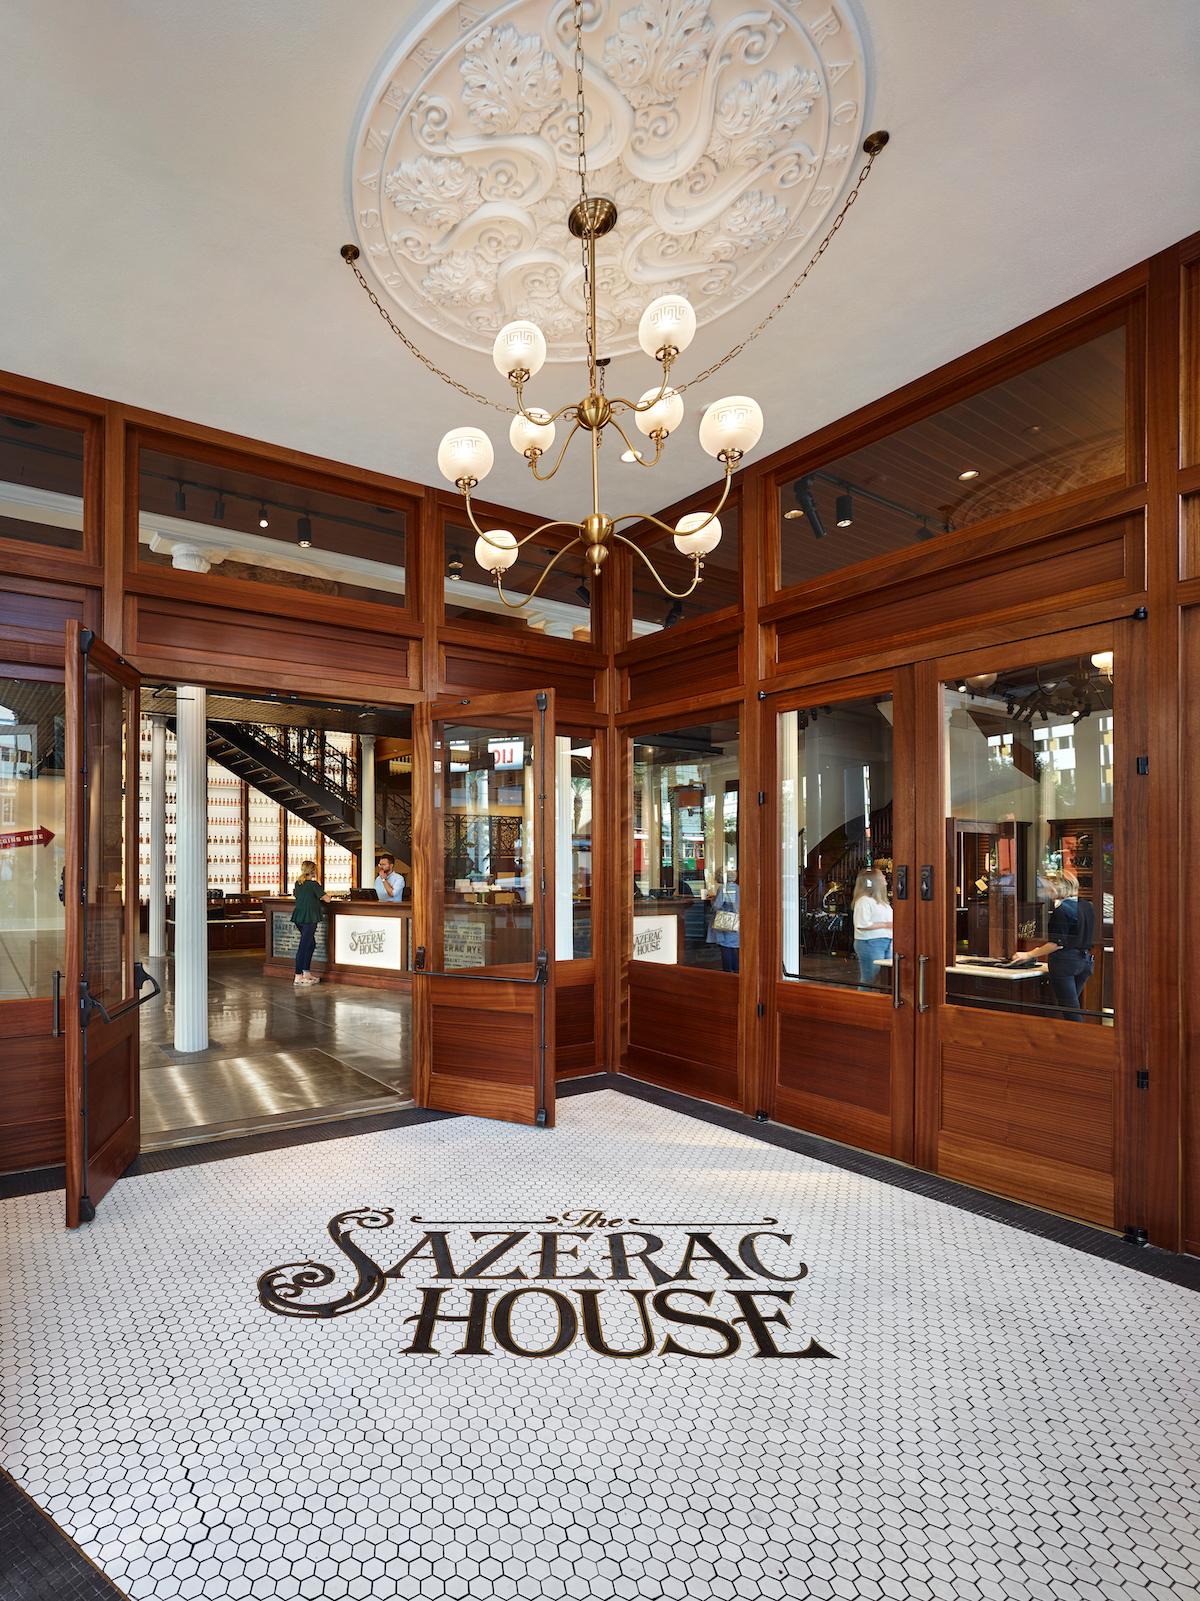 The Sazerac House features a bar and offers free museum tours and tastings. (Courtesy of Sazerac House)